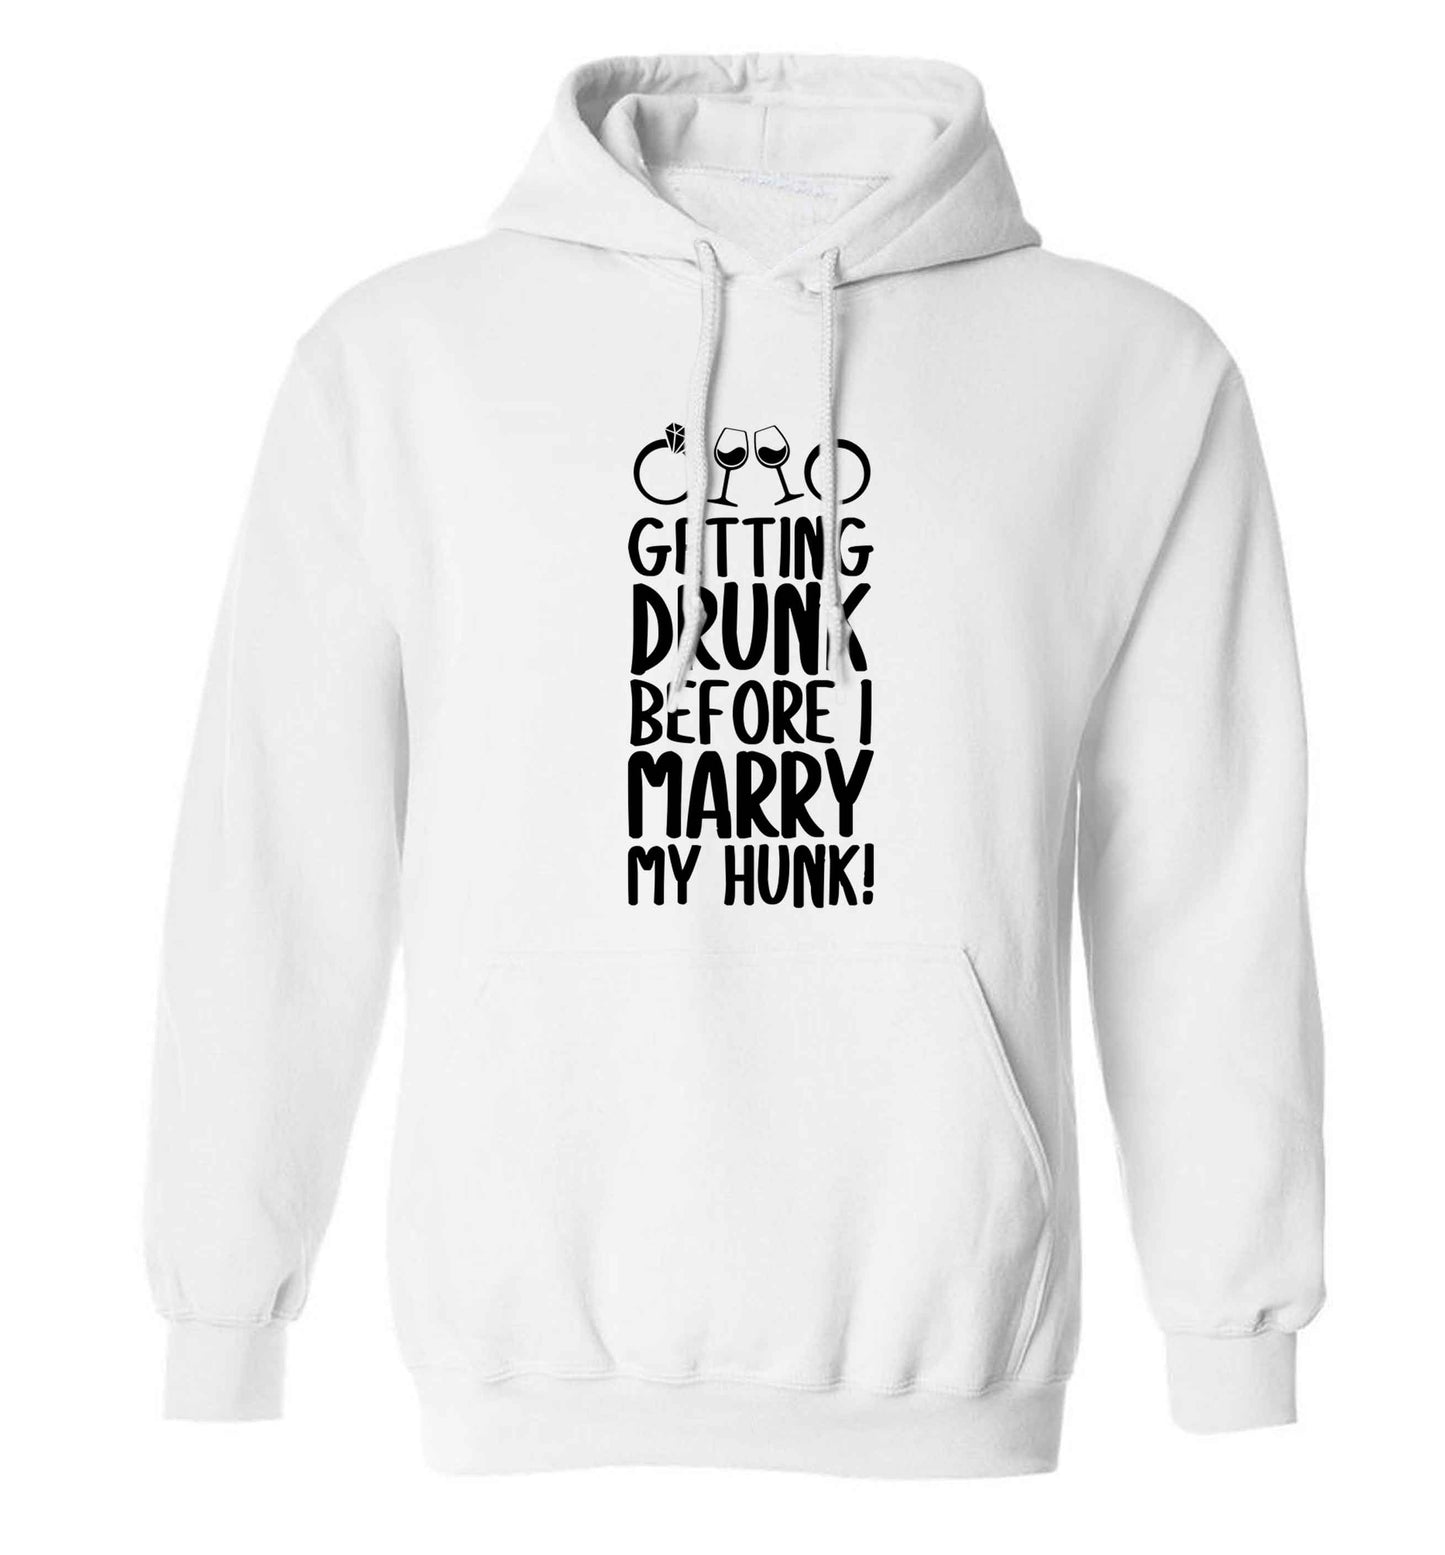 Getting drunk before I marry my hunk adults unisex white hoodie 2XL